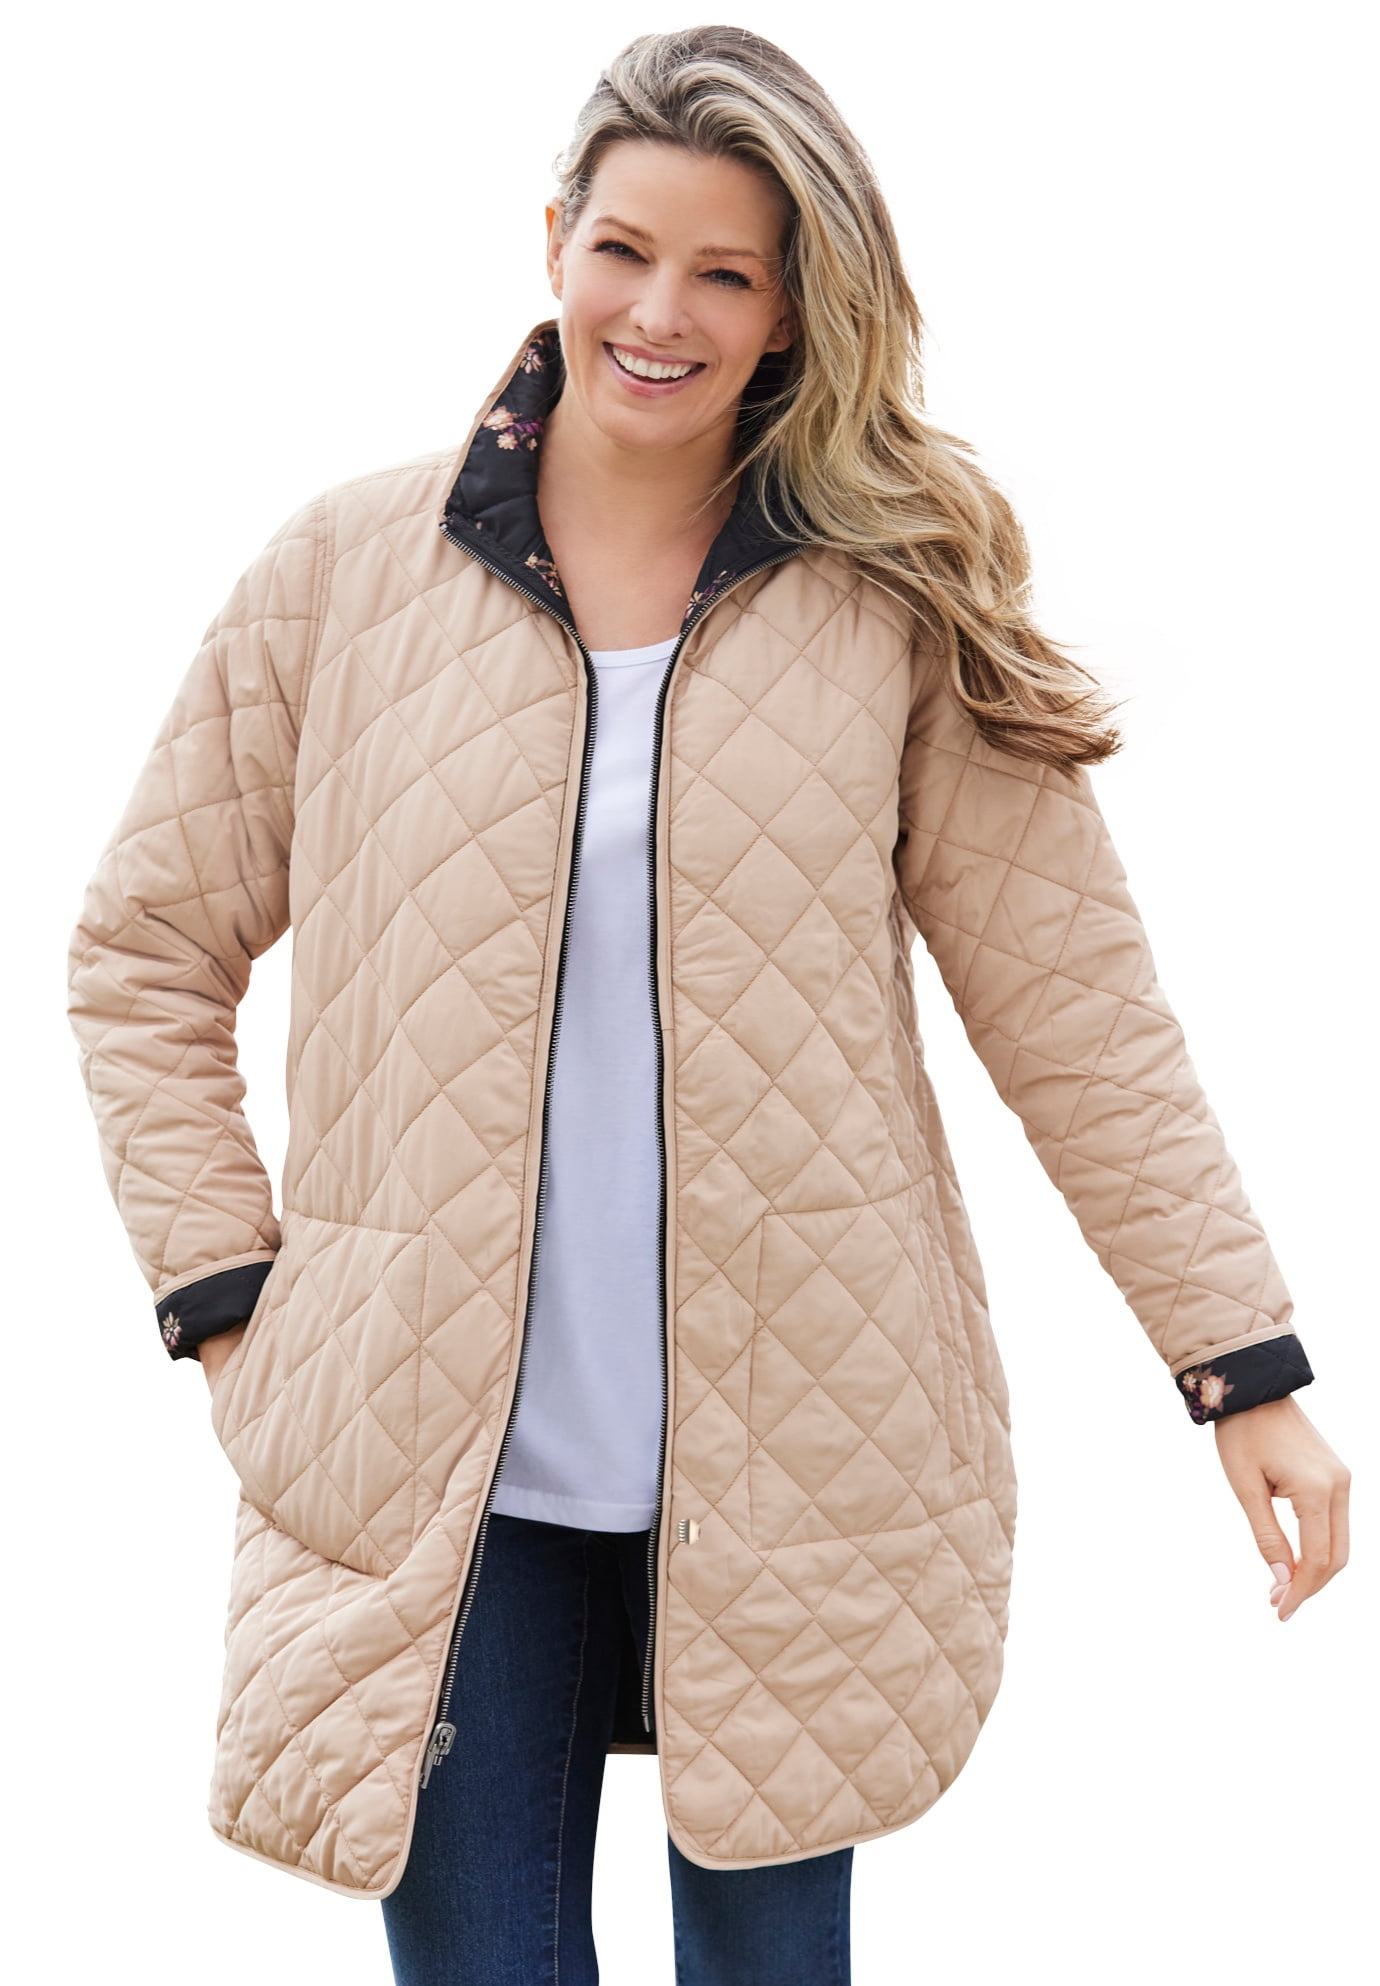 Woman Within Woman Within Womens Plus Size Reversible Quilted Barn Jacket Walmartcom Walmartcom